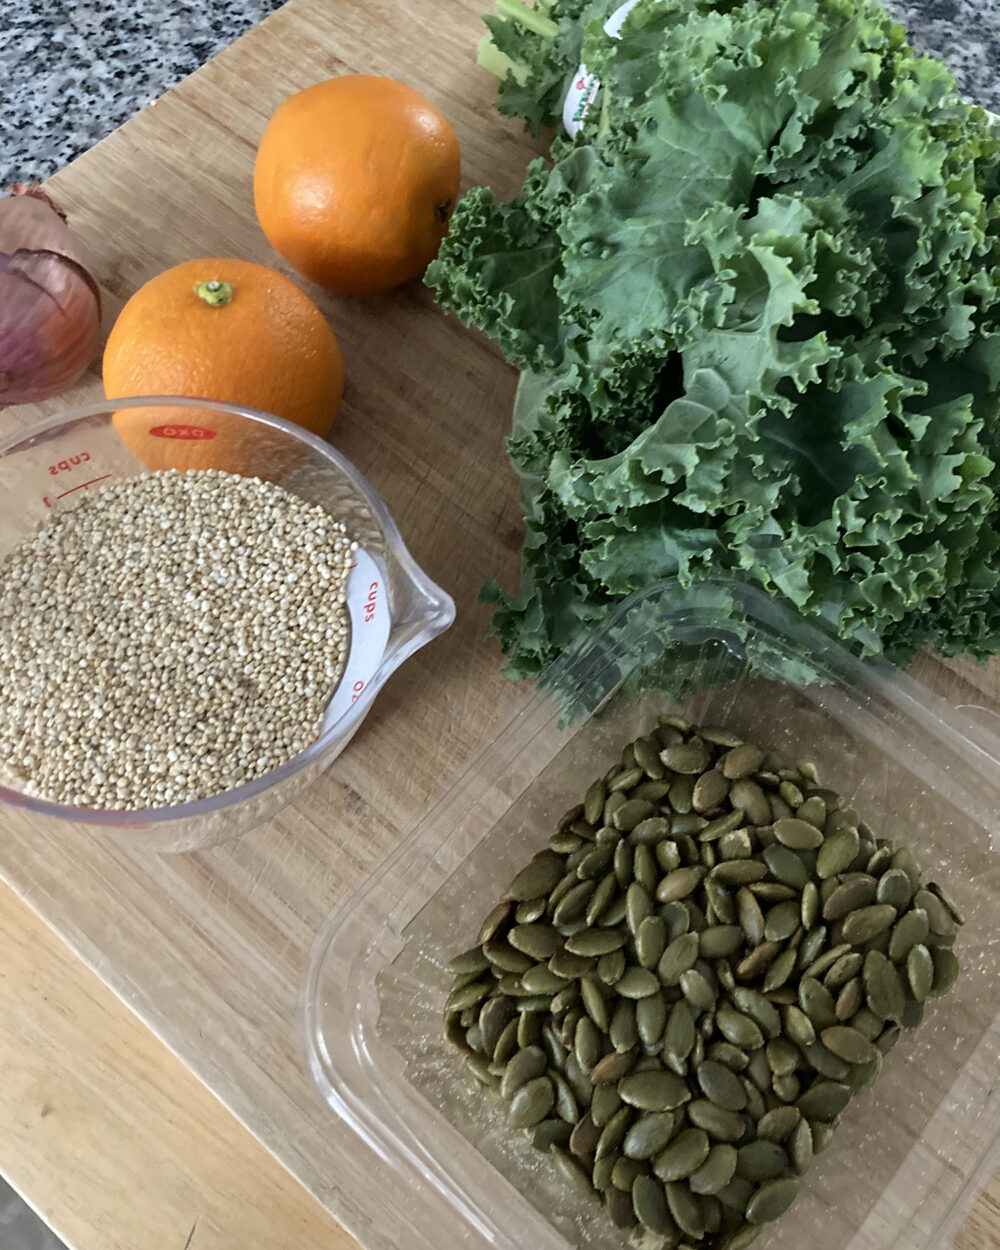 Curly kale, two oranges, a shallot, a measuring cup with raw quinoa and a plastic container of pepitas are shown on a wooden cutting board.